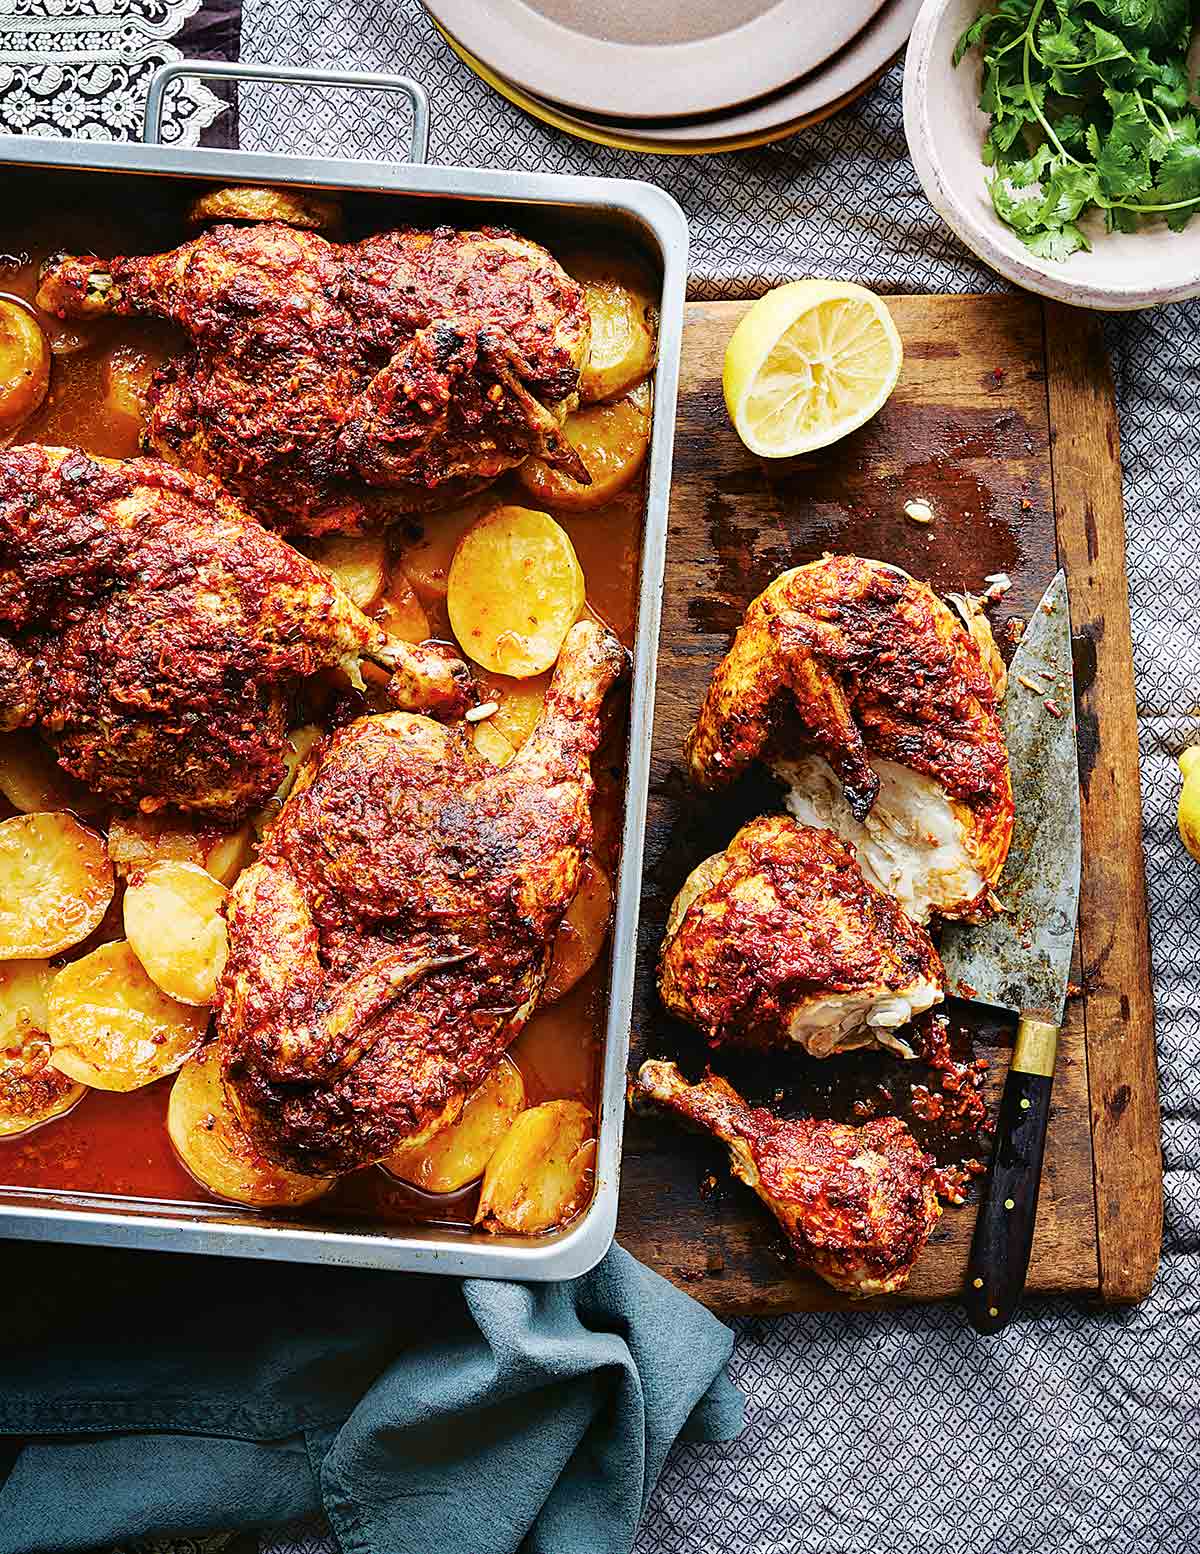 A pan of harissa roasted chicken sitting on top of sliced roasted potatoes, nearby a cutting board and knife.